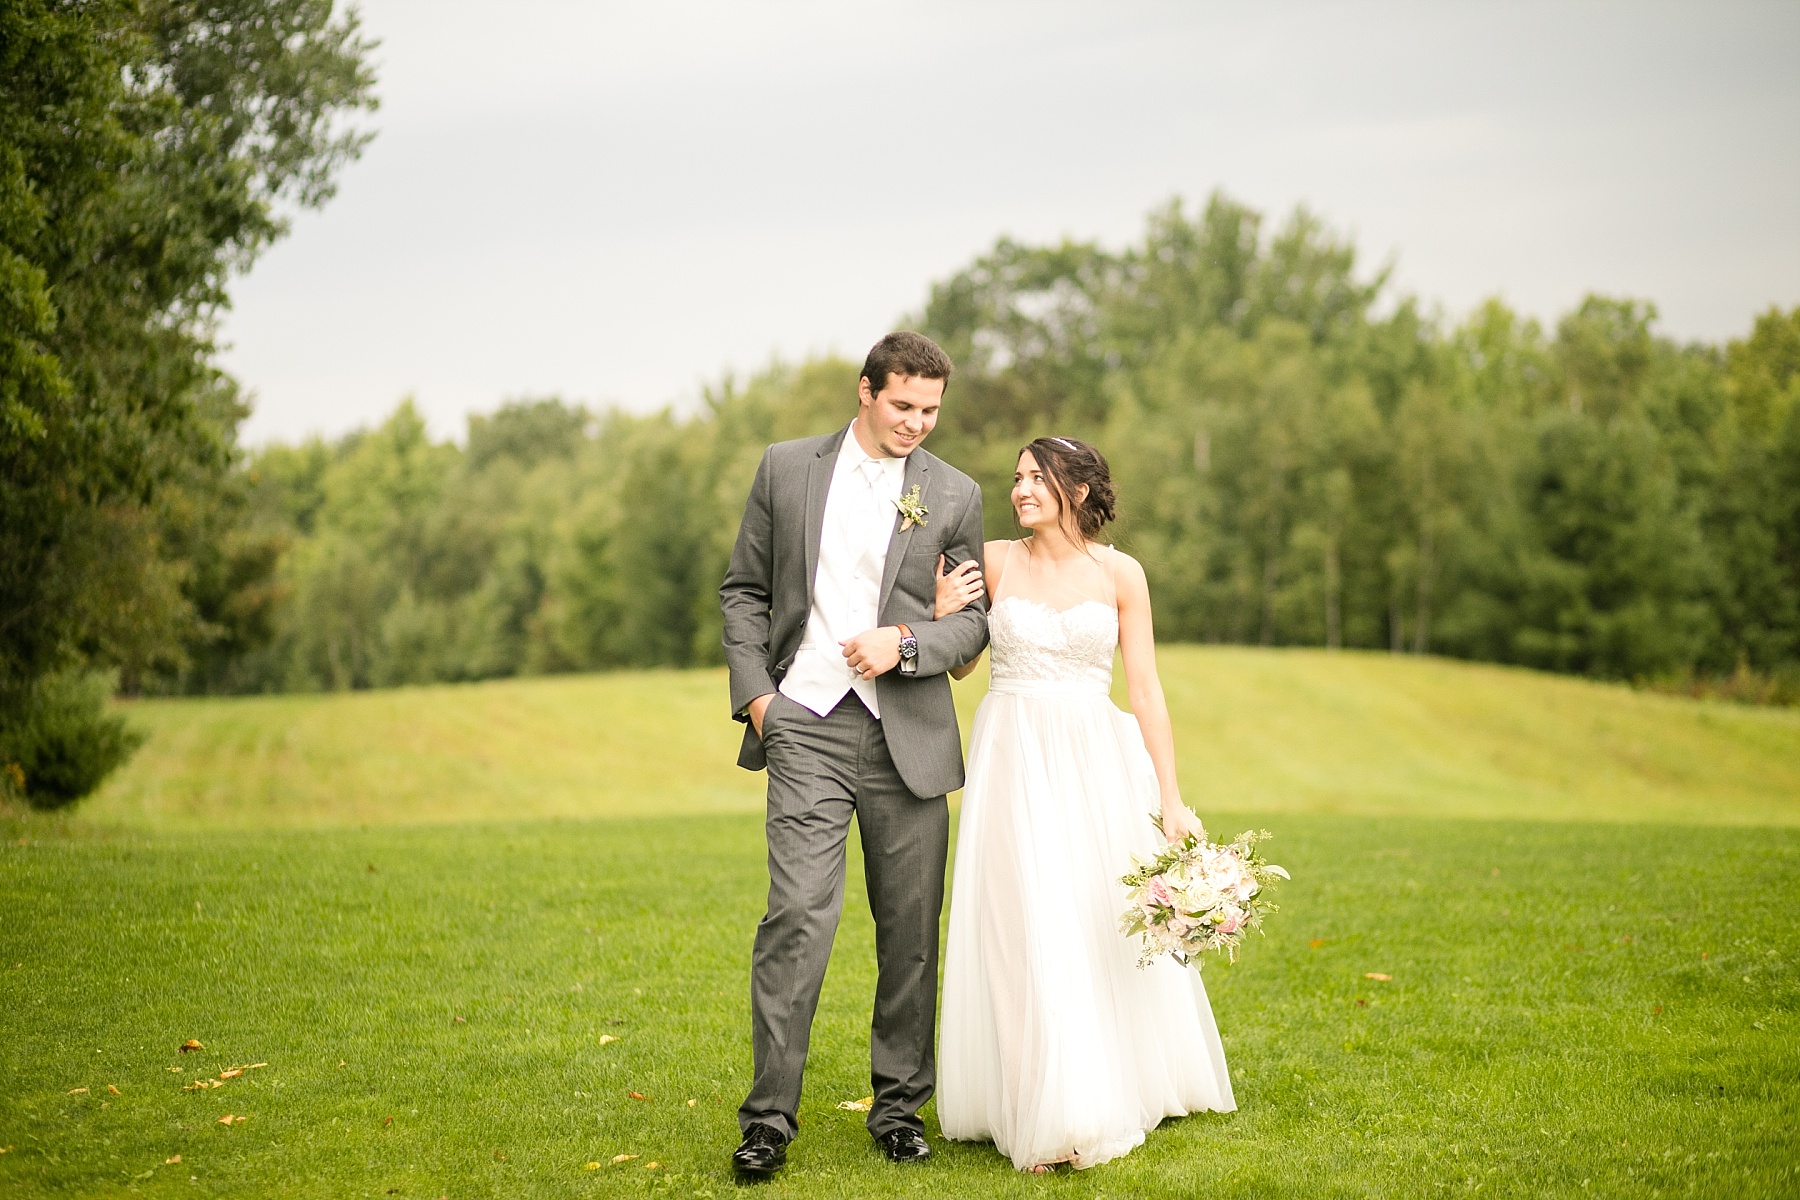 The day long drizzle didn't stop Sloane and Josh from having the most romantic rainy Barn on Stoney Hill wedding.